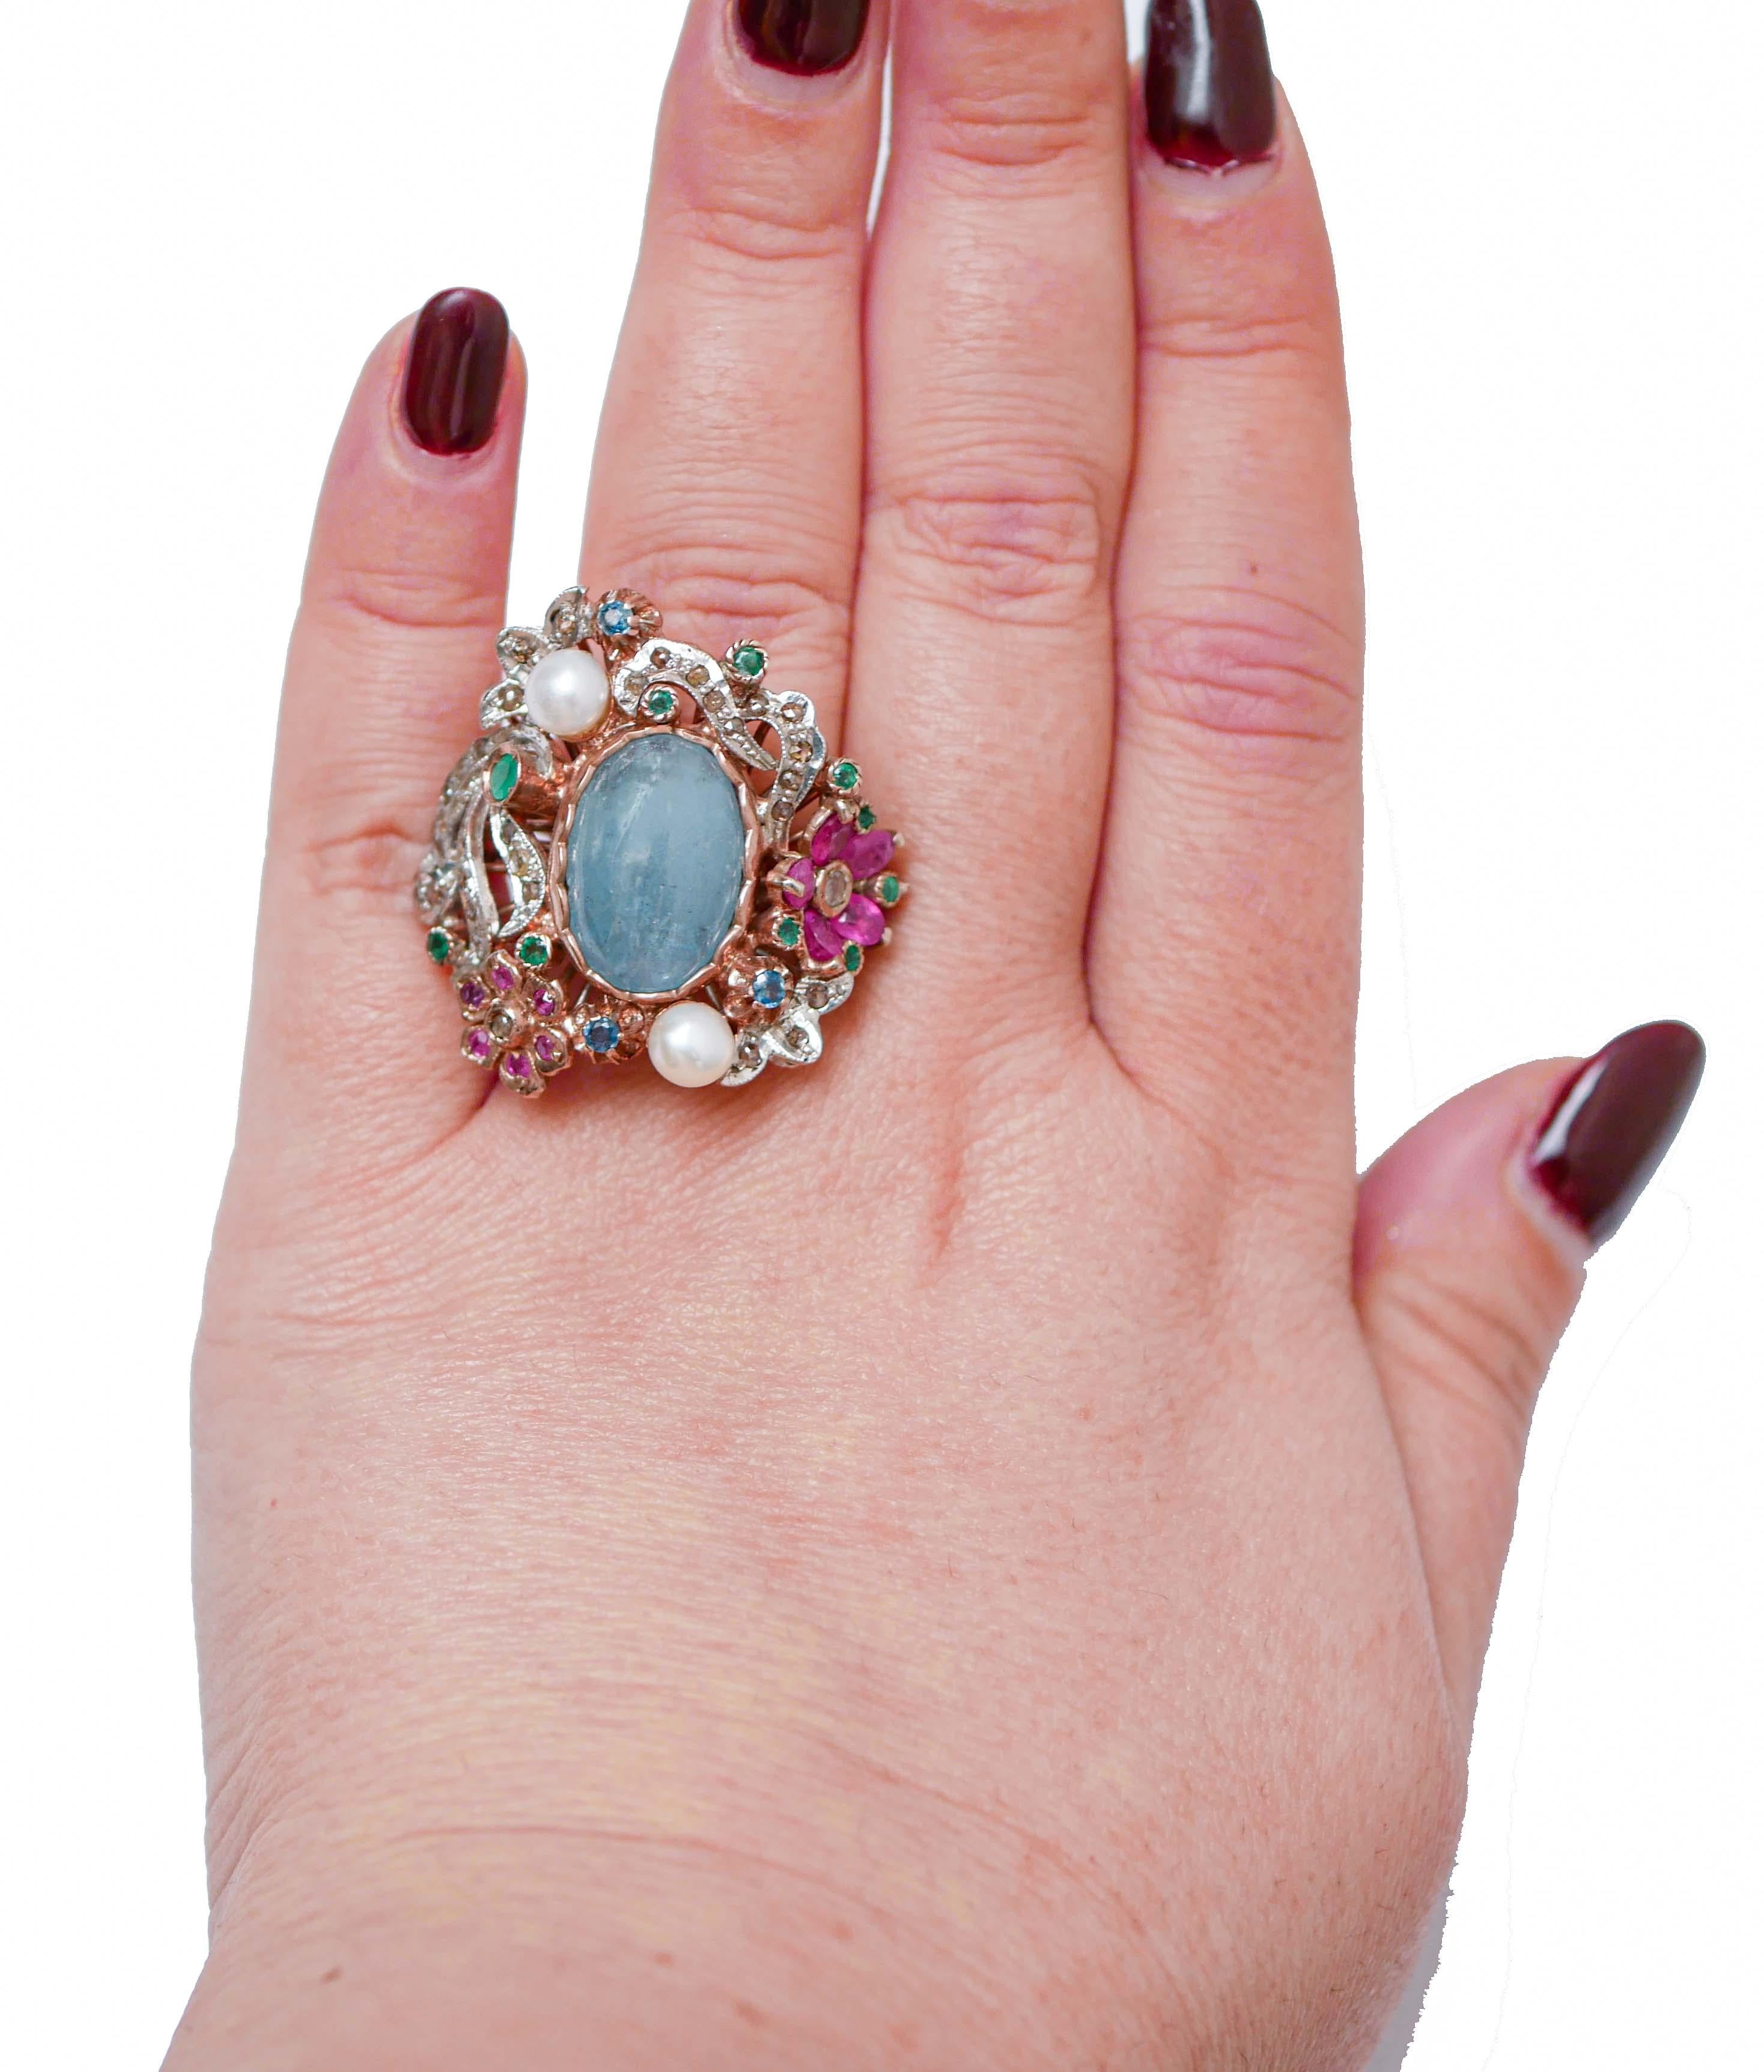 Mixed Cut Aquamarine, Pearls, Emeralds, Rubies, Sapphires, Diamonds, Gold and Silver Ring. For Sale